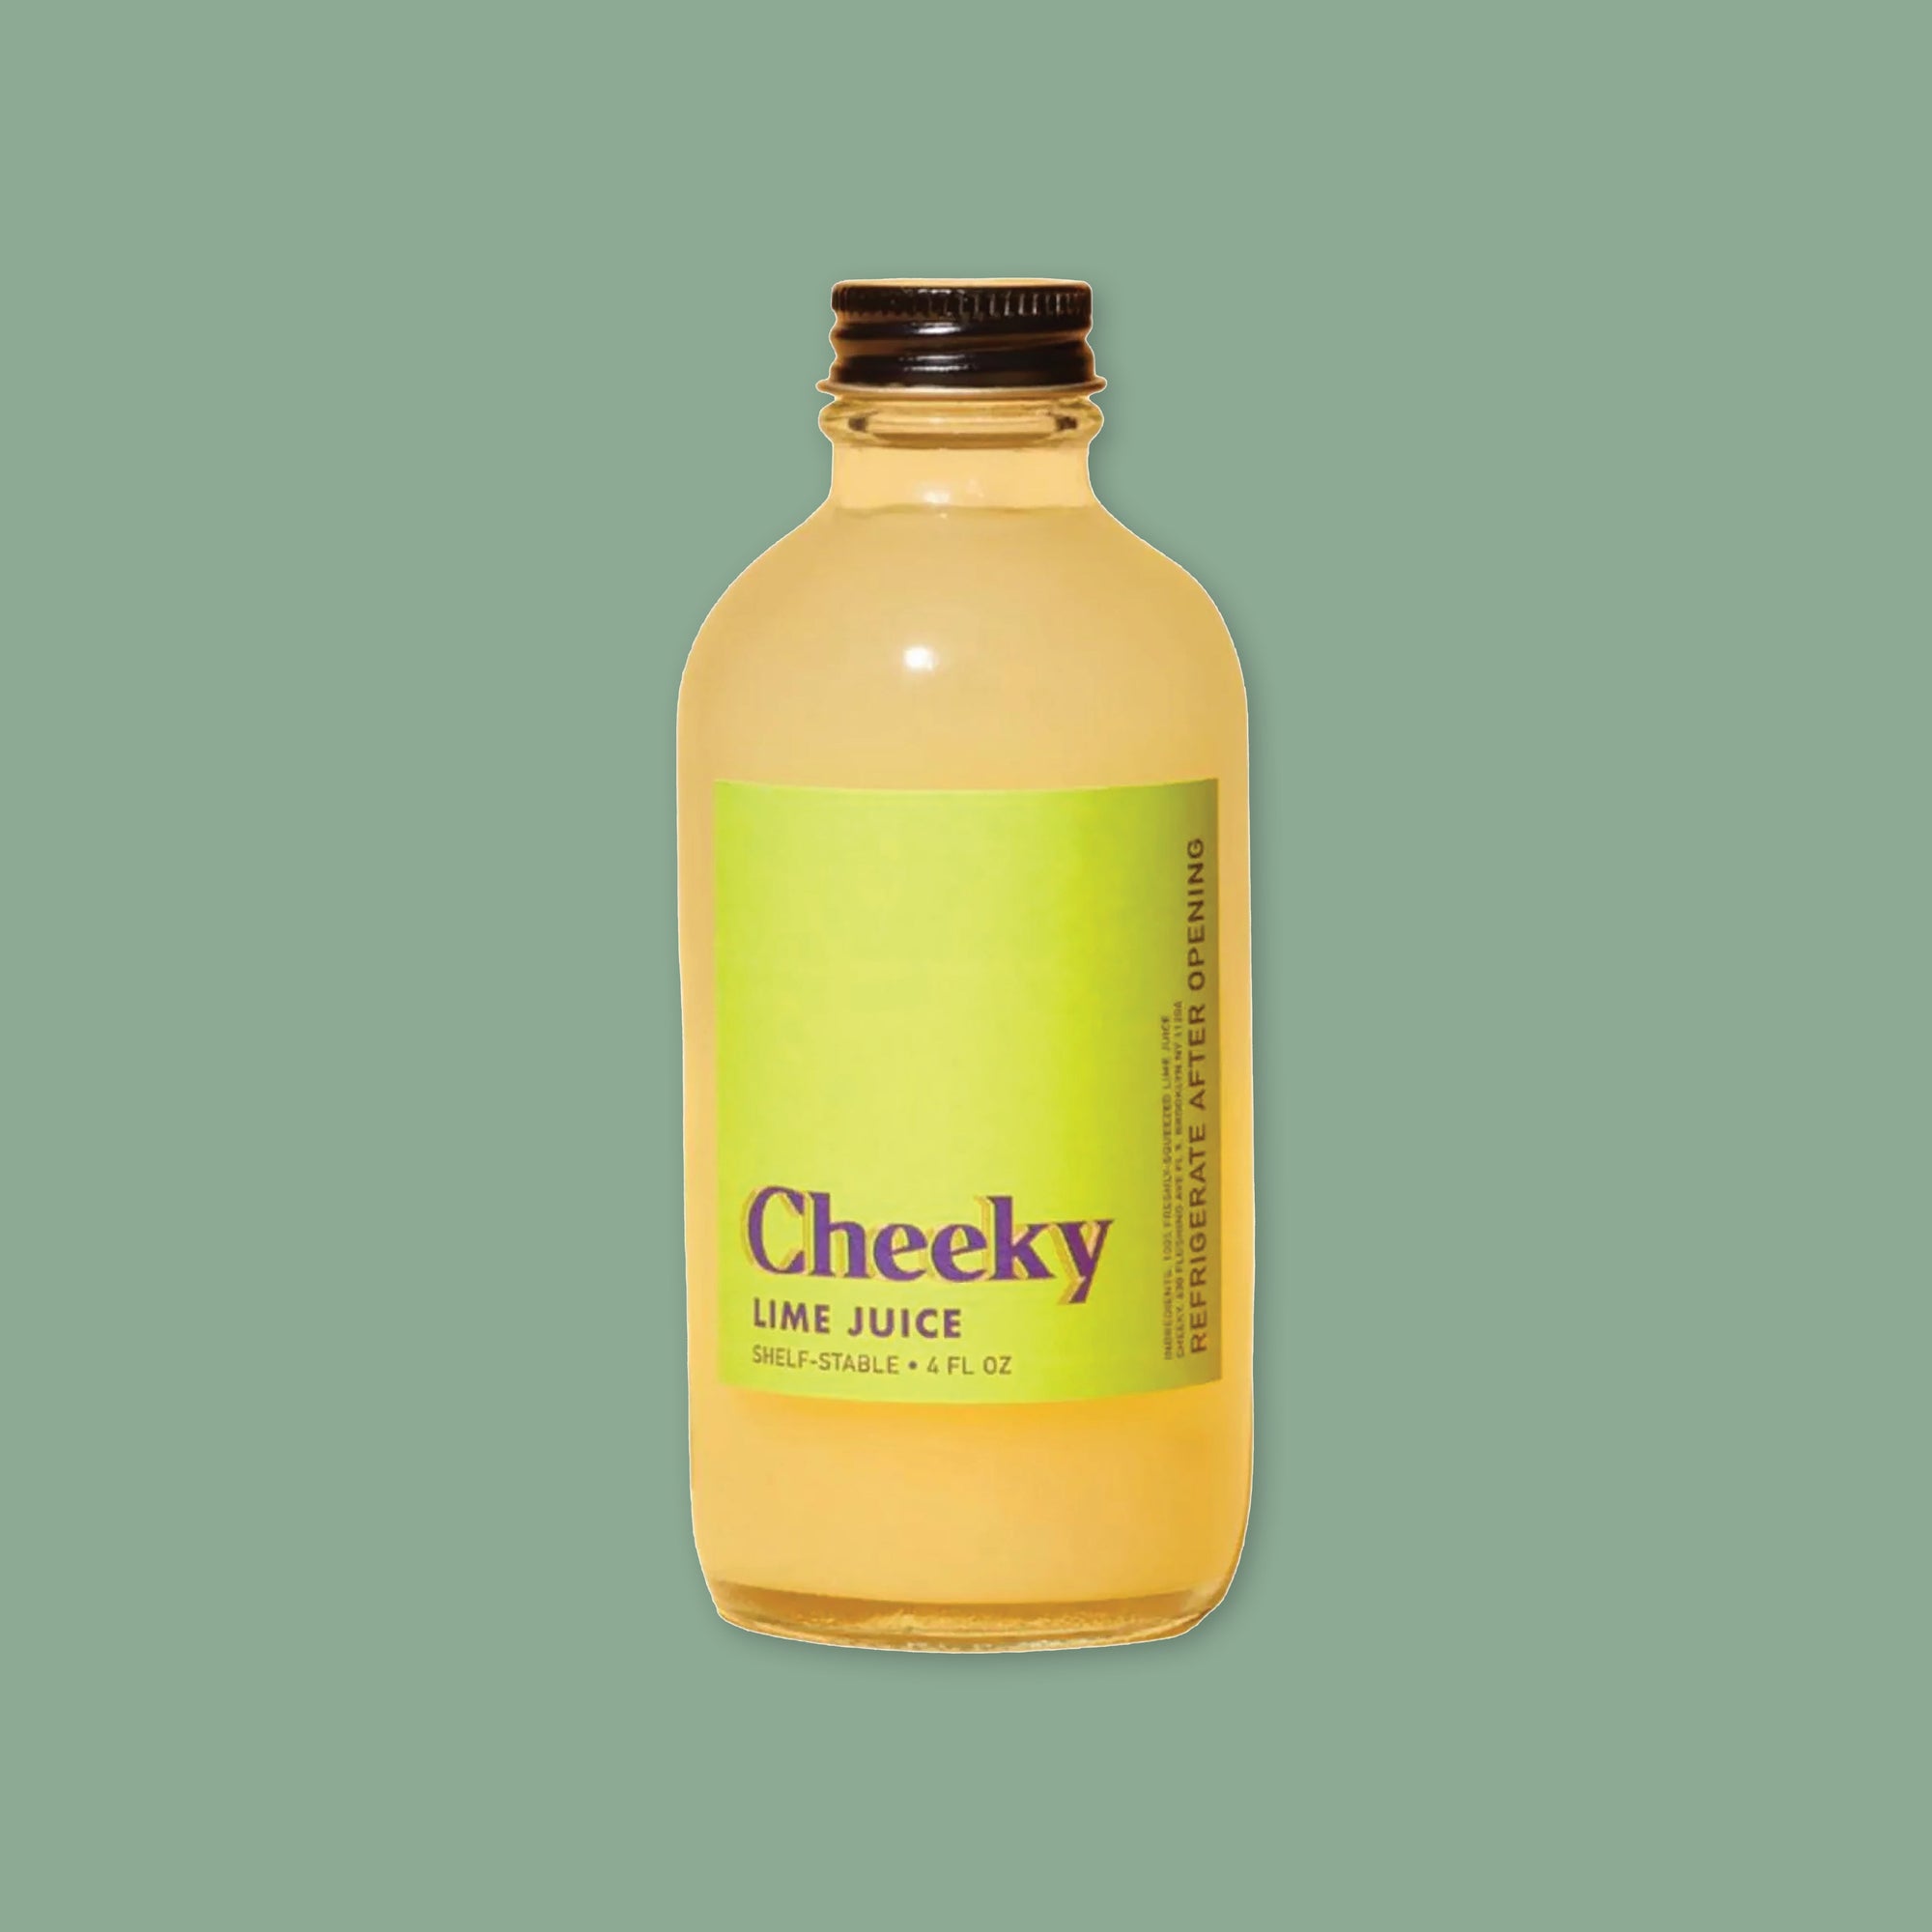 On a mossy green background sits a bottle. This clear bottle has a golden yellow liquid in it and a lime green label on the front. It says "Cheeky" in a purple, serif font. It also says "LIME JUICE" in purple, all caps block font. Shake well • Shelf-Stable • 4 Fl Oz